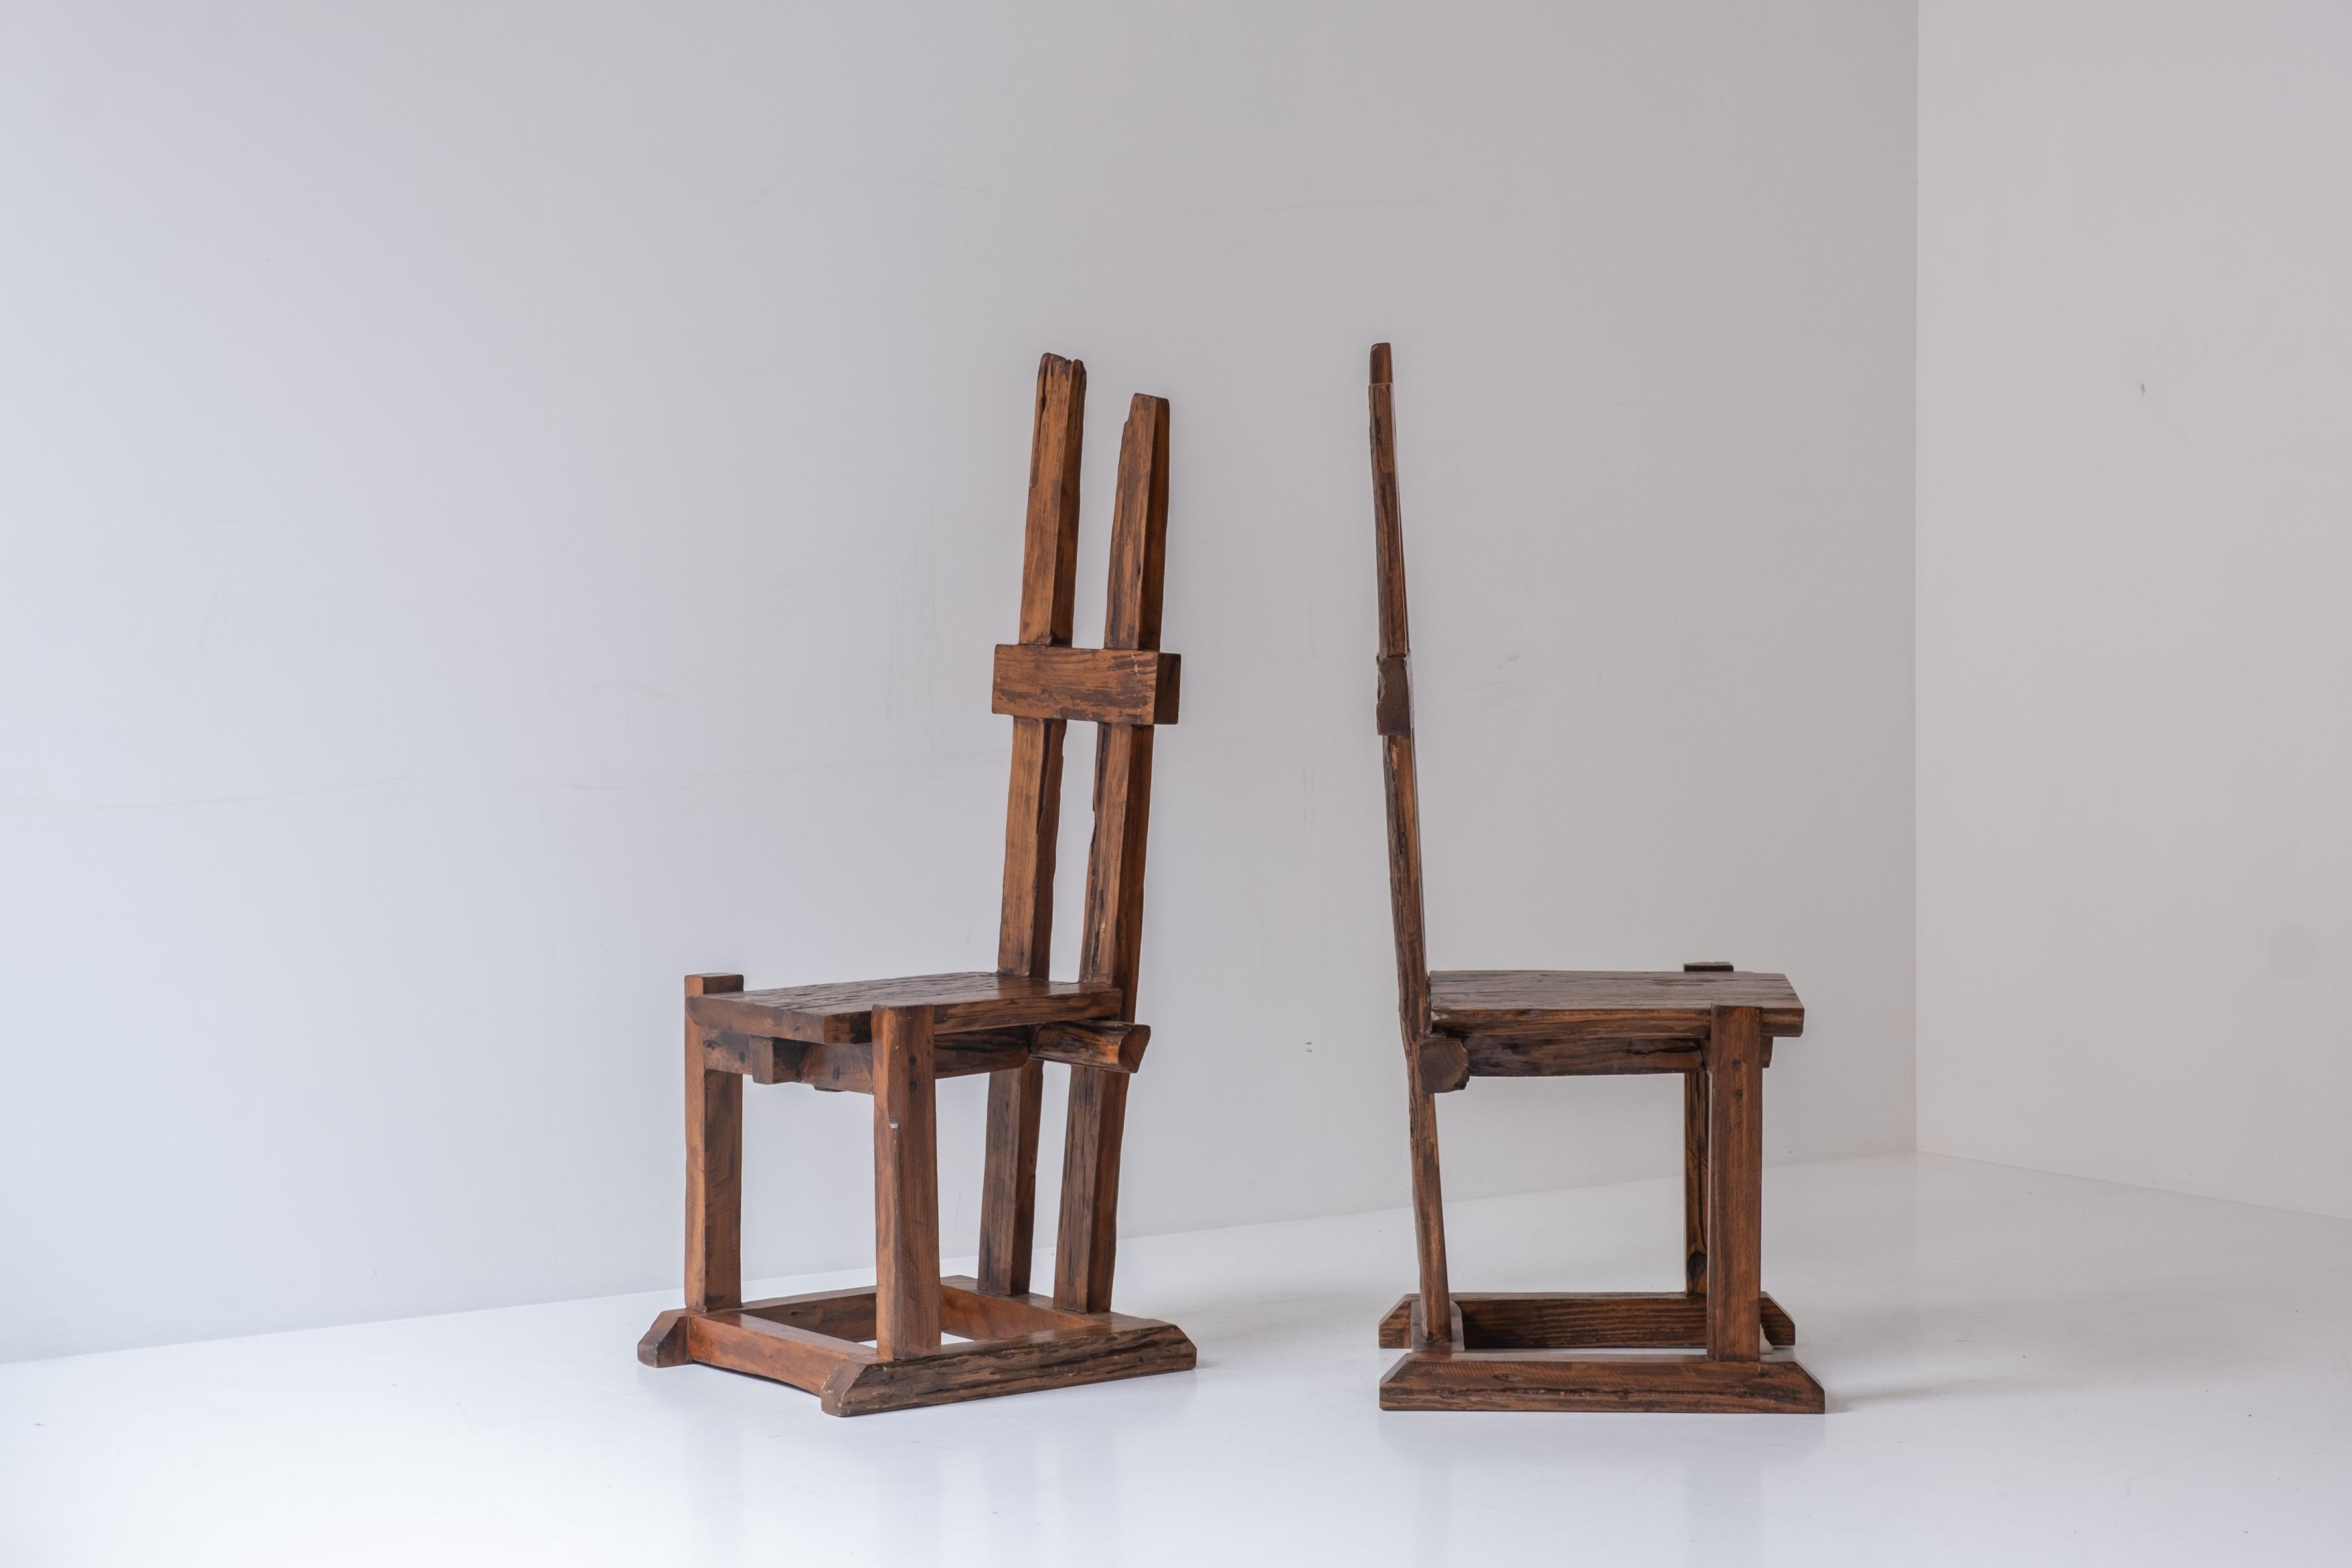 A set of two primitive high back chairs designed and manufactured during the 1950s. The craftsman was inspired by the wabi-sabi philosophy centered on the acceptance of transience and imperfection. Unique pair in its original untouched condition.